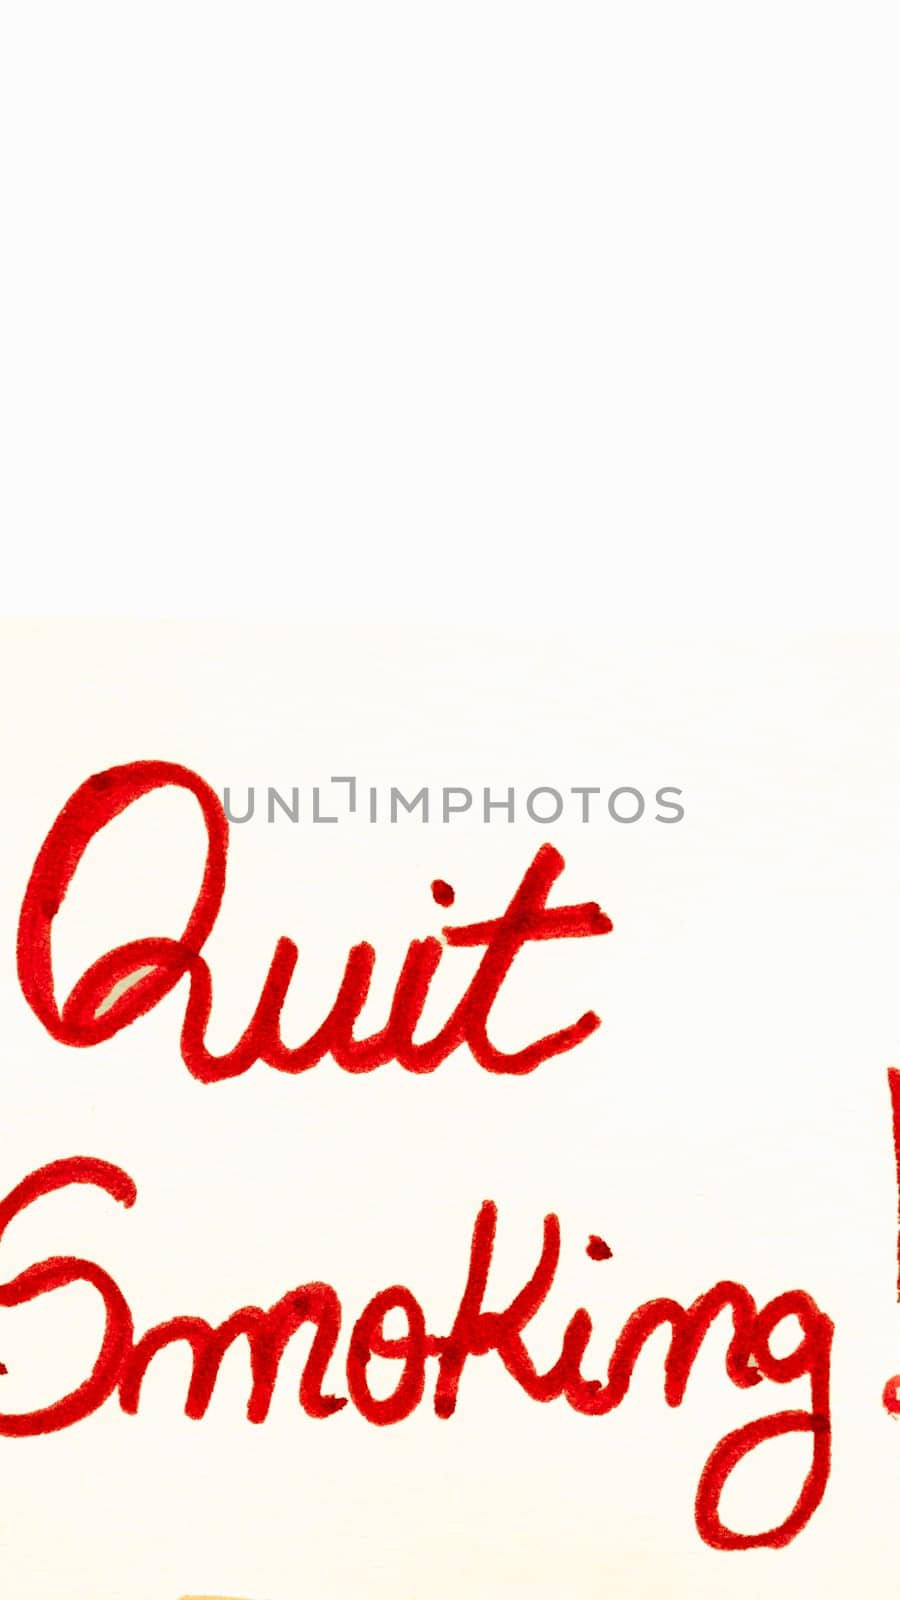 Quit smoking handwriting text close up isolated on yellow paper with copy space. by vladispas